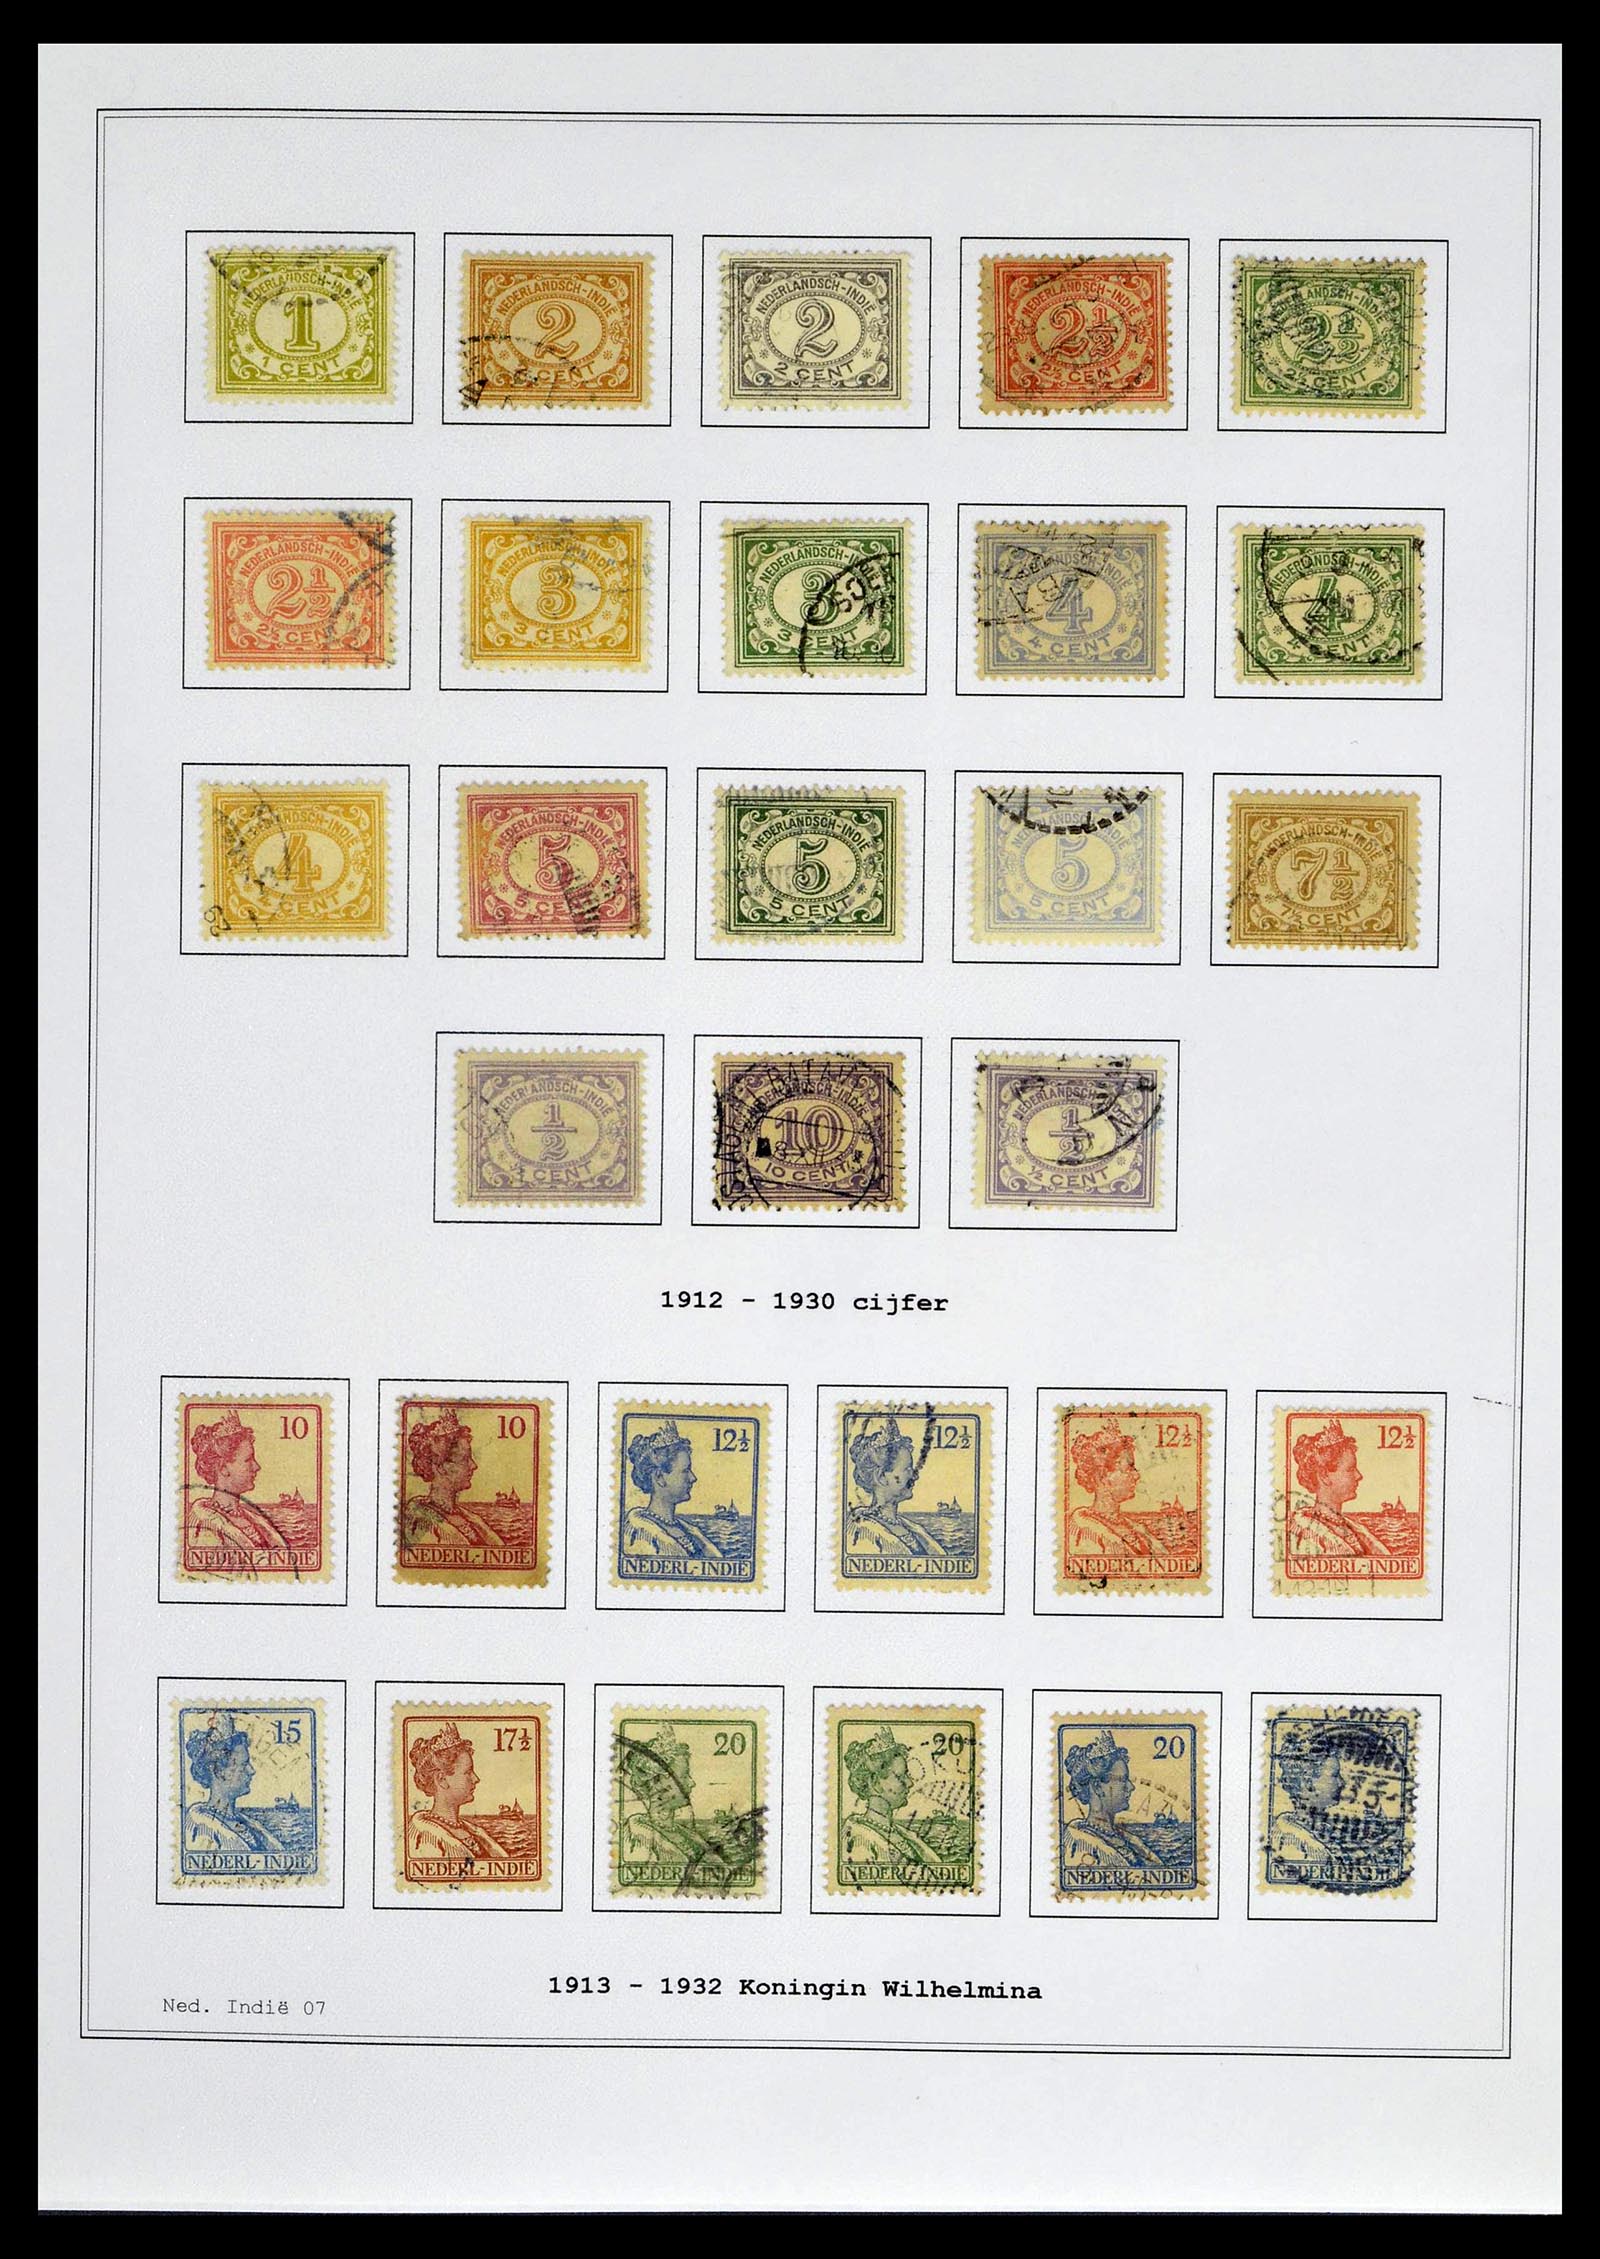 39026 0014 - Stamp collection 39026 Dutch east Indies and Suriname 1864-1975.